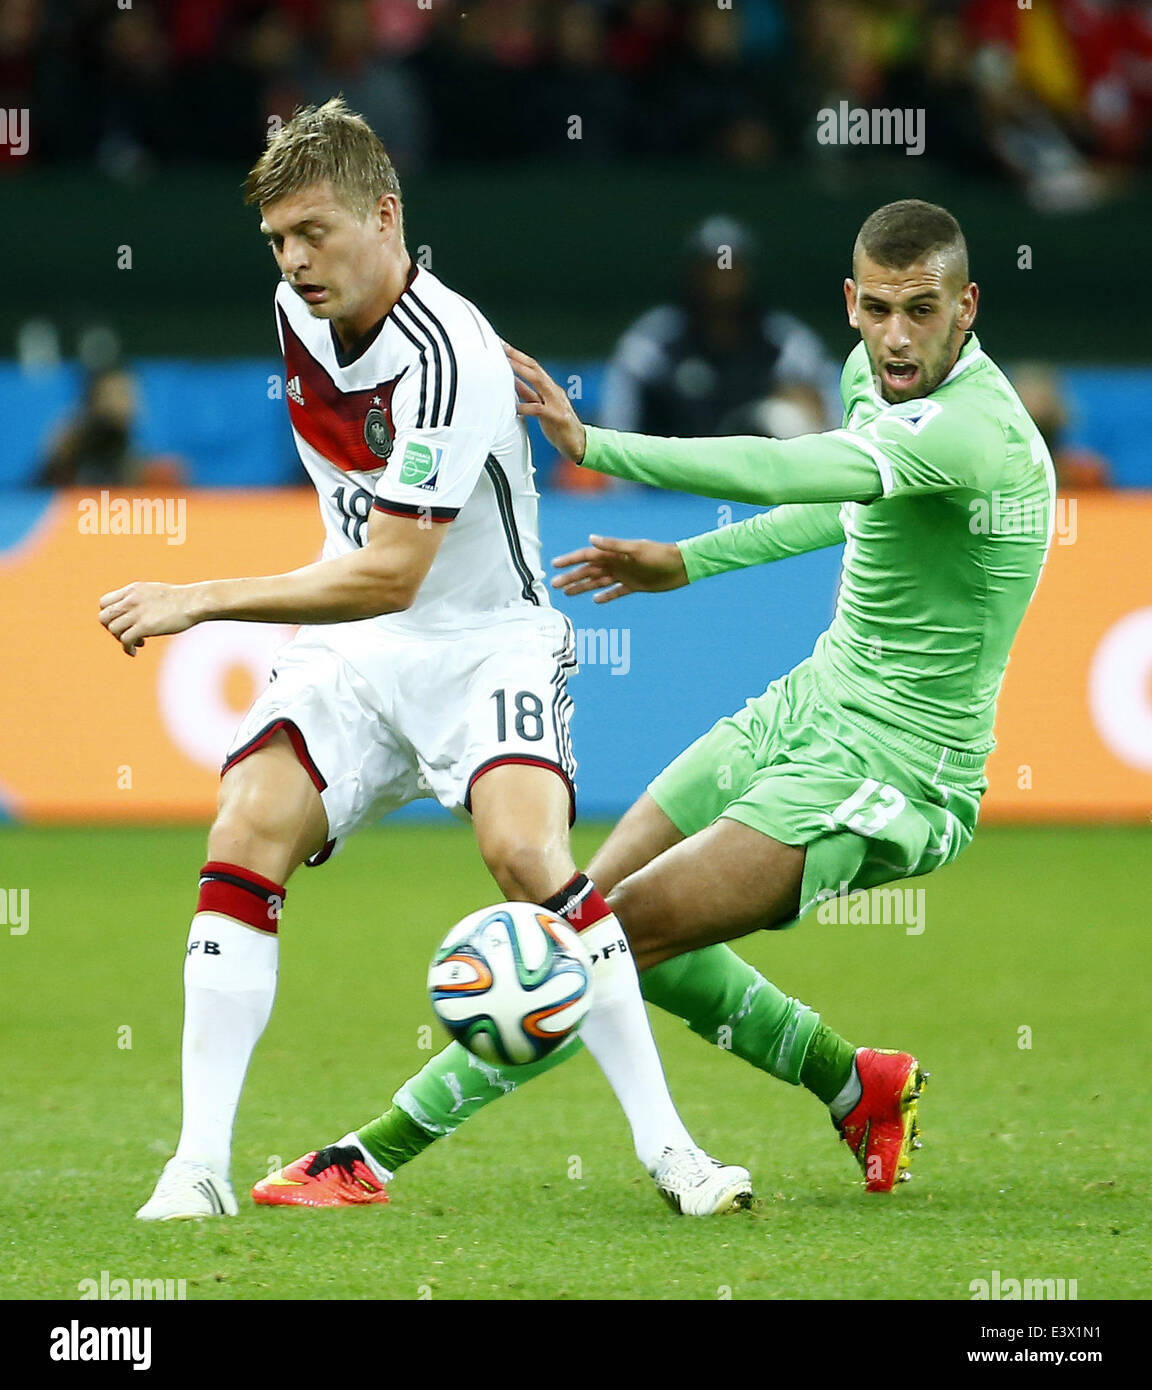 Porto Alegre, Brazil. 30th June, 2014. Germany's Toni Kroos vies with Algeria's Islam Slimani during a Round of 16 match between Germany and Algeria of 2014 FIFA World Cup at the Estadio Beira-Rio Stadium in Porto Alegre, Brazil, on June 30, 2014. Credit:  Chen Jianli/Xinhua/Alamy Live News Stock Photo